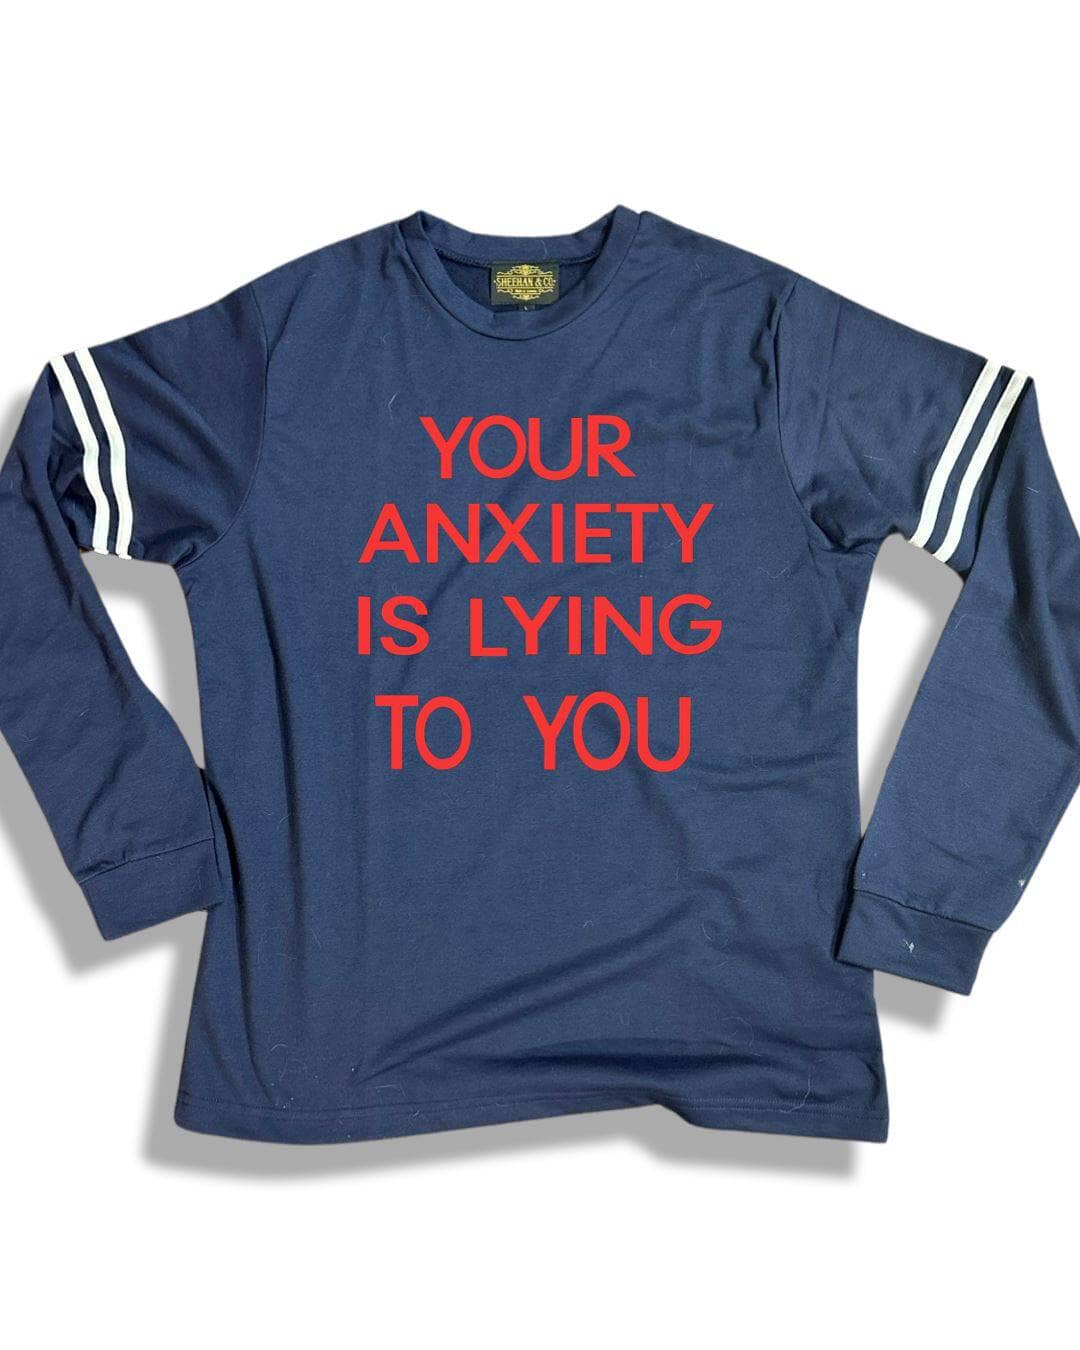 Your Anxiety is Lying to You Statement on French Terry Sweatshirt - Sheehan and Co.